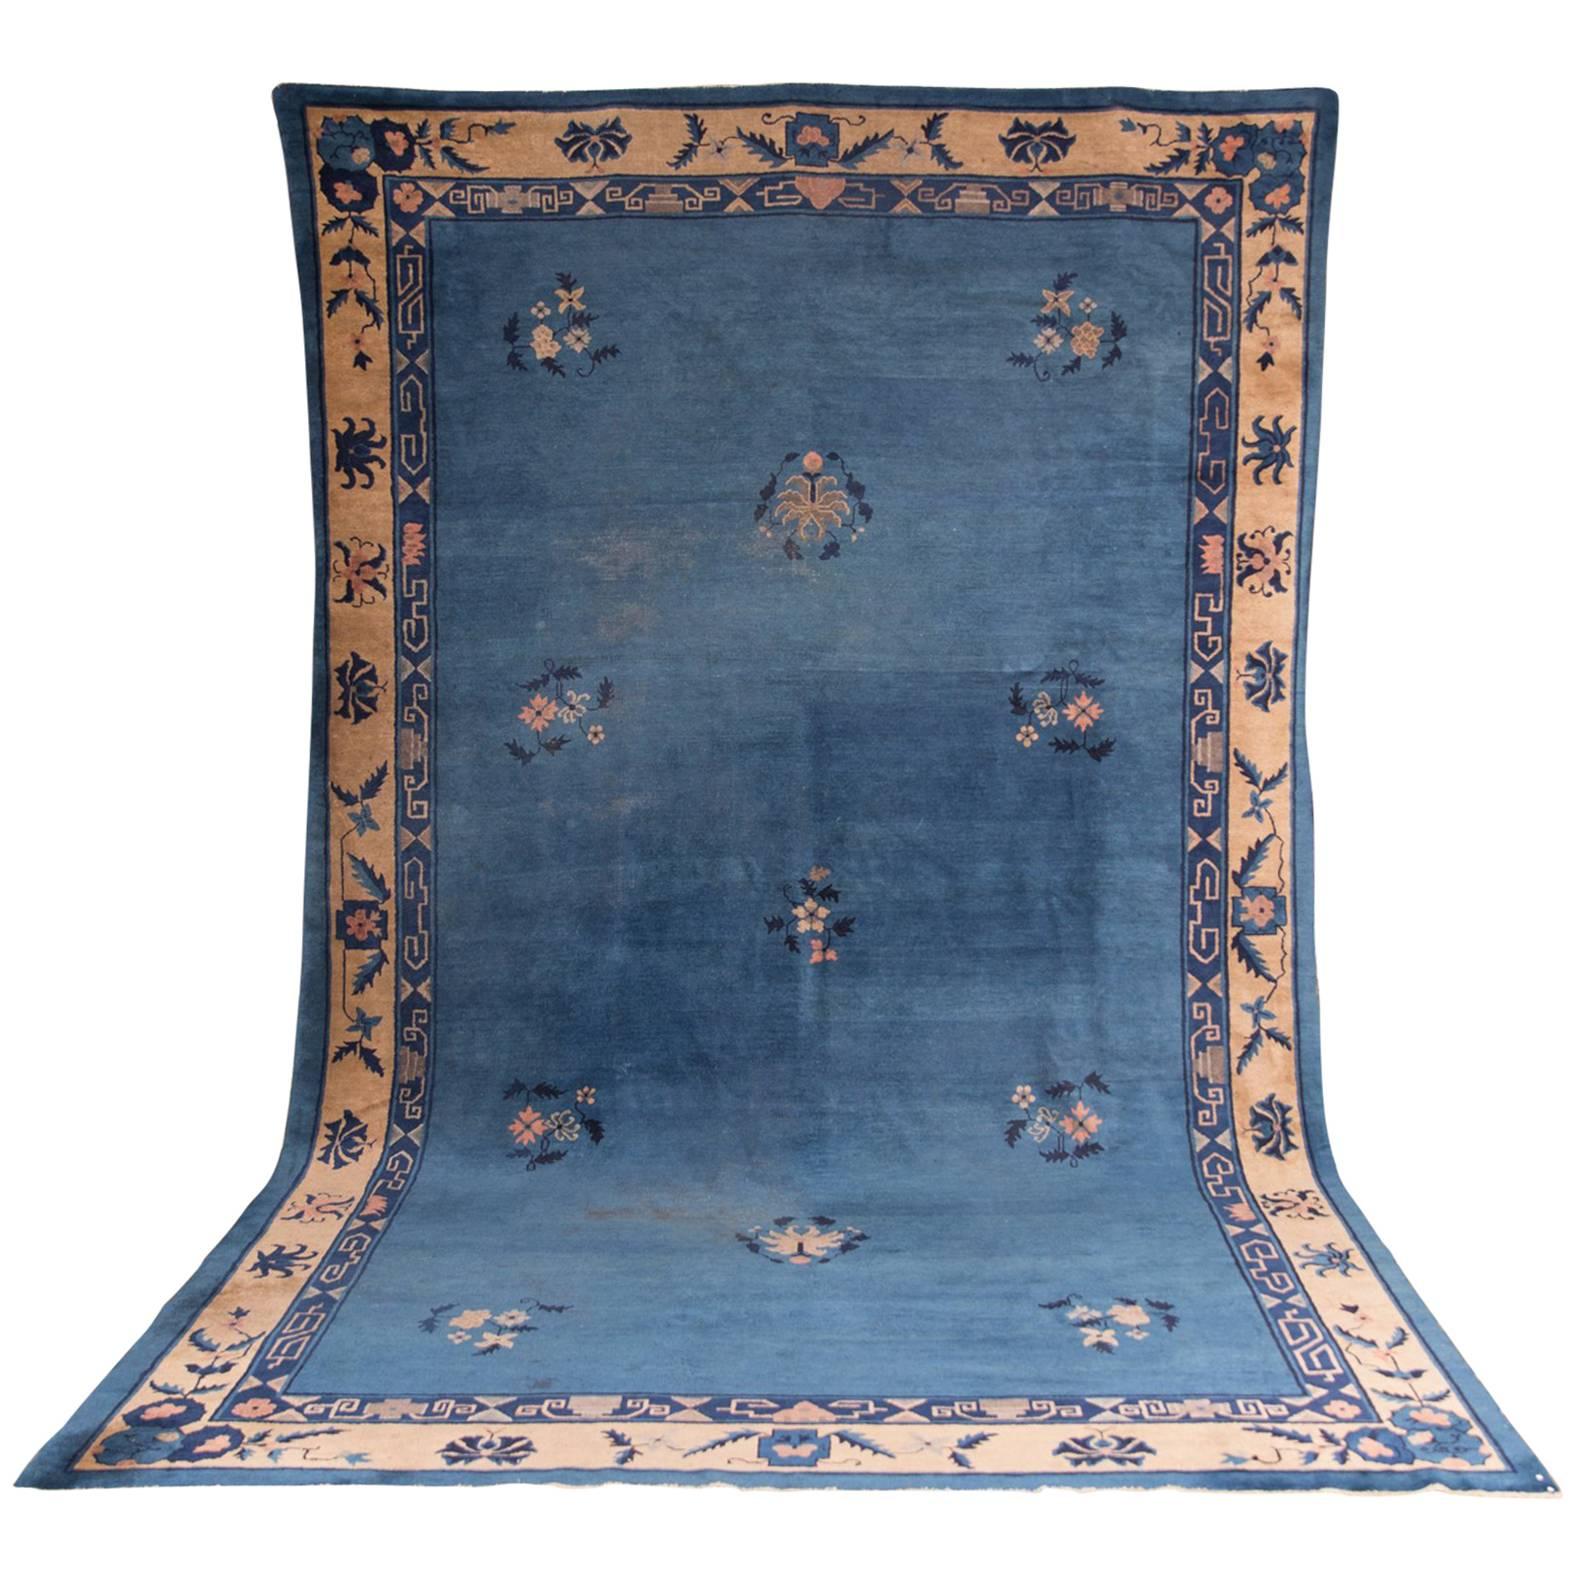 19th Century Large Antique Chinese Carpet Rug in Blue